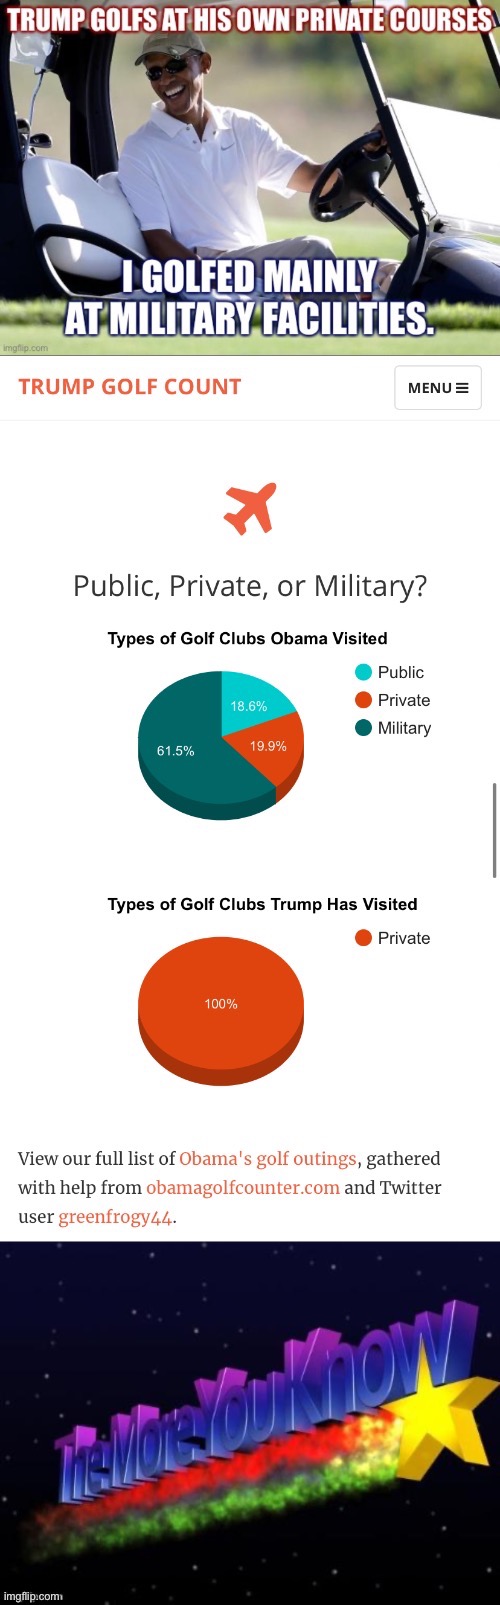 On Memorial Day weekend when the President is golfing at one of his own courses again: how do Trump and Obama stack up on this? | image tagged in golf,president trump,barack obama,obama,conservative hypocrisy,trump is an asshole | made w/ Imgflip meme maker